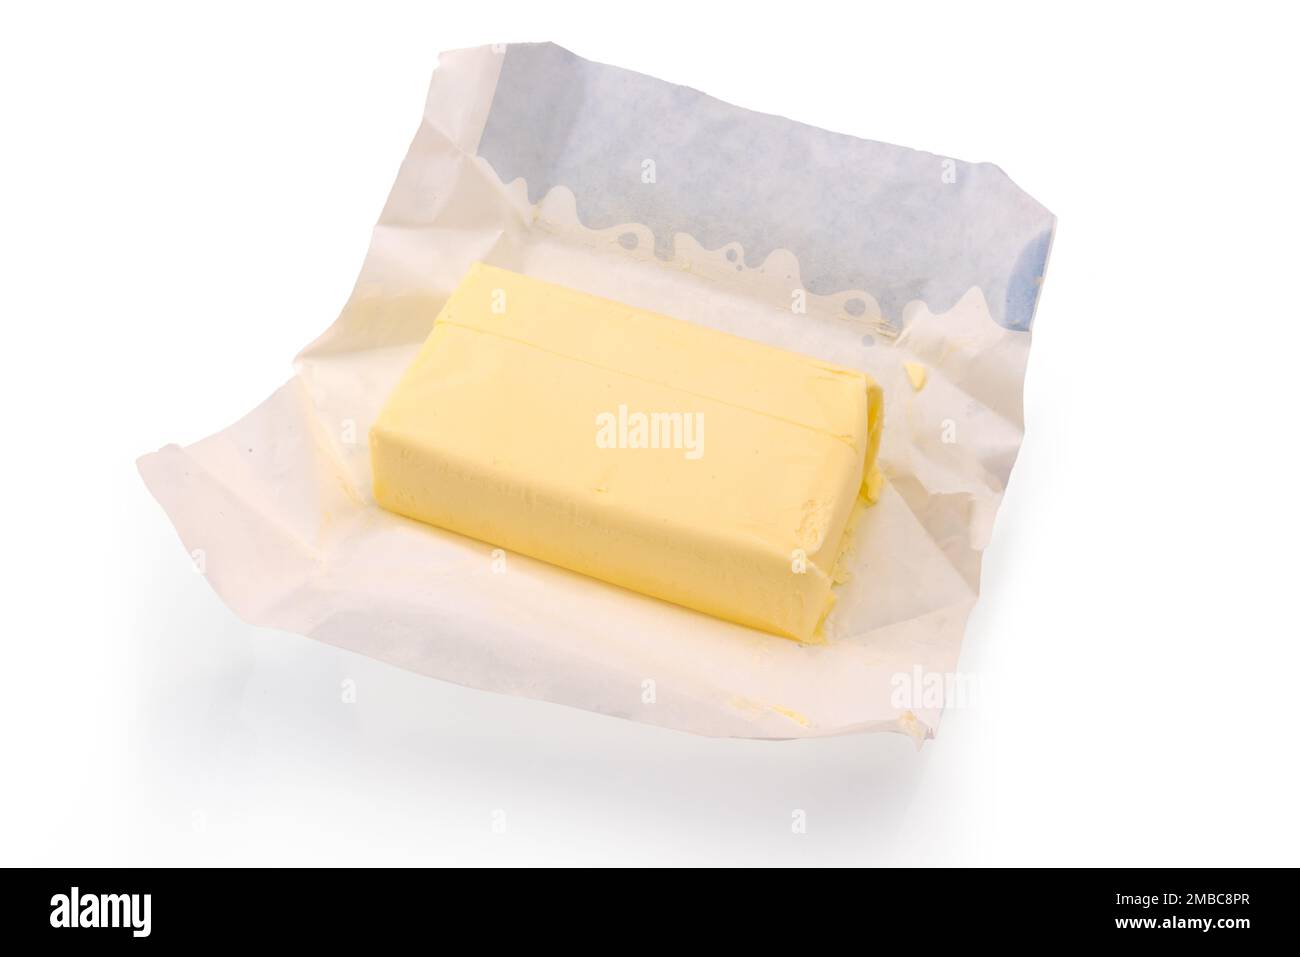 Unpacked stick of butter on wax paper from packaging, isolated on white, clipping path included Stock Photo